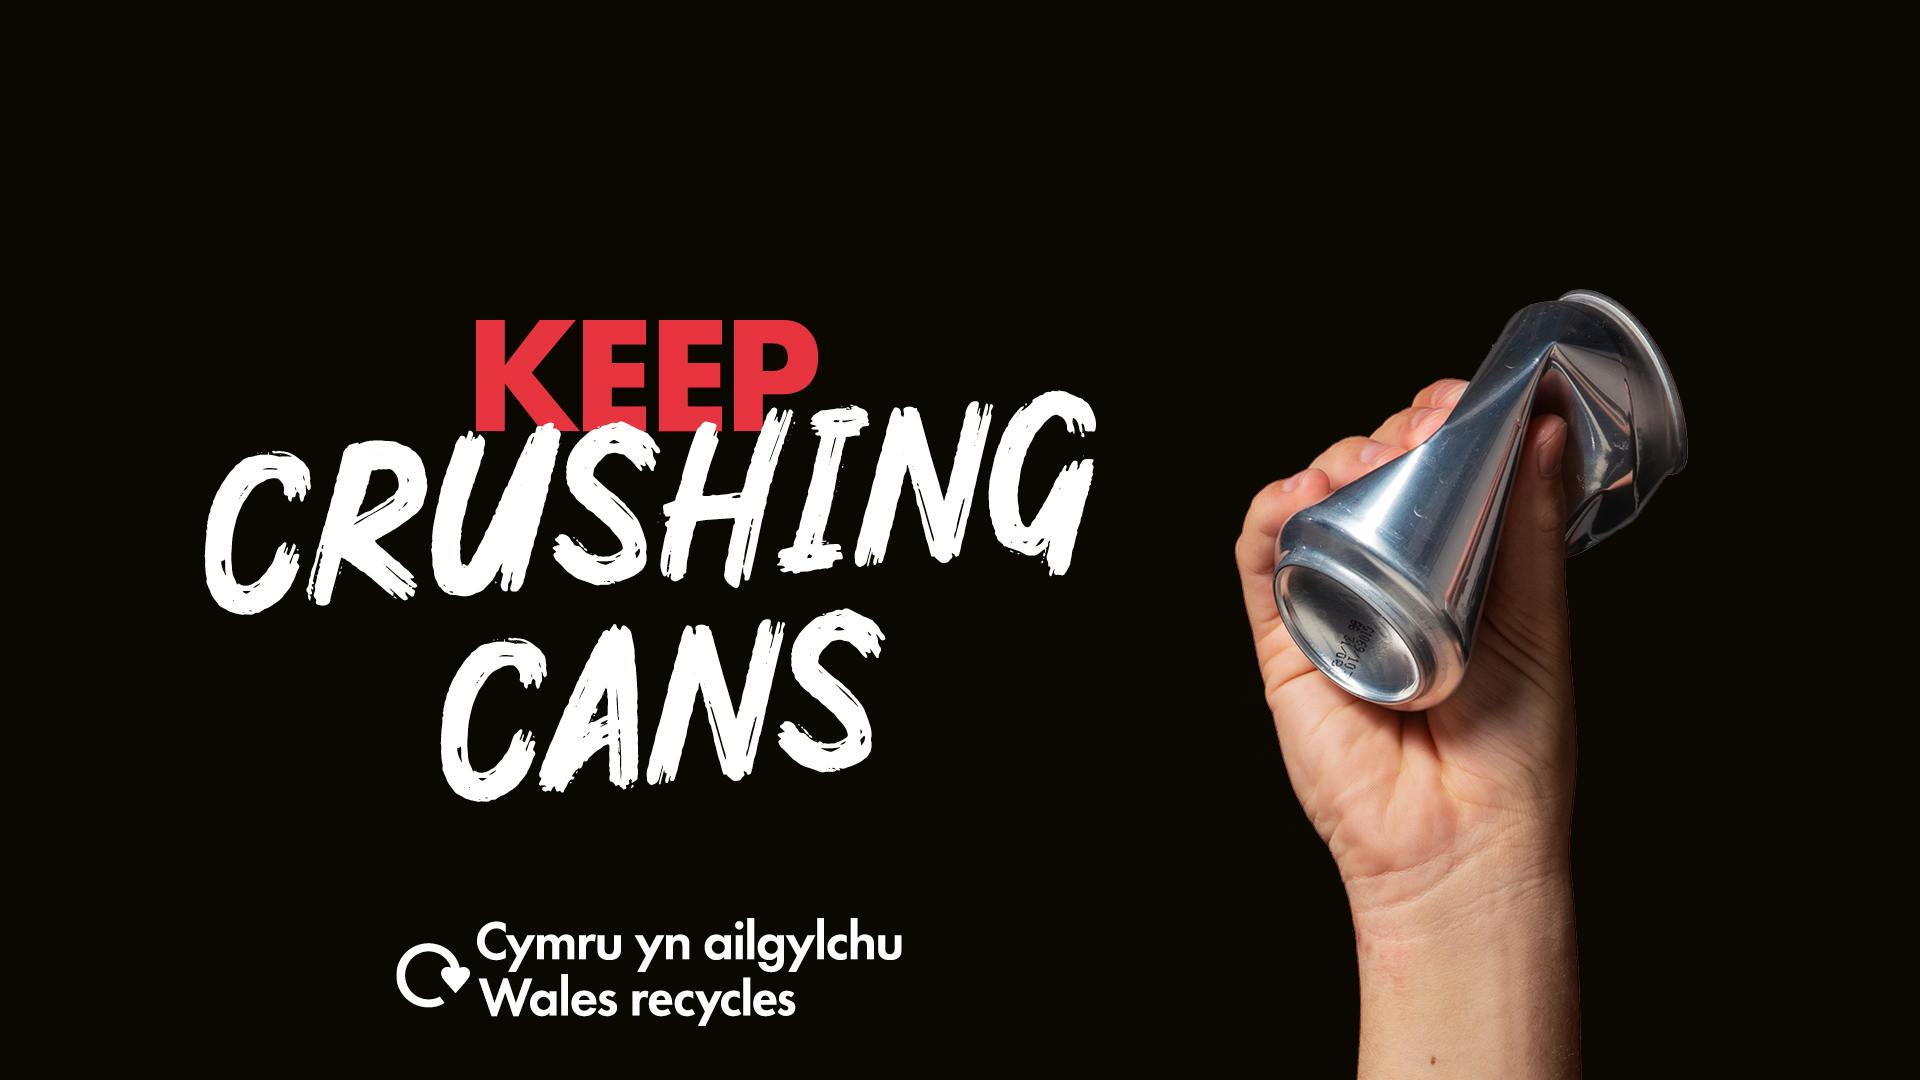 White hand holding a drink can with the slogan "Keep crushing cans"